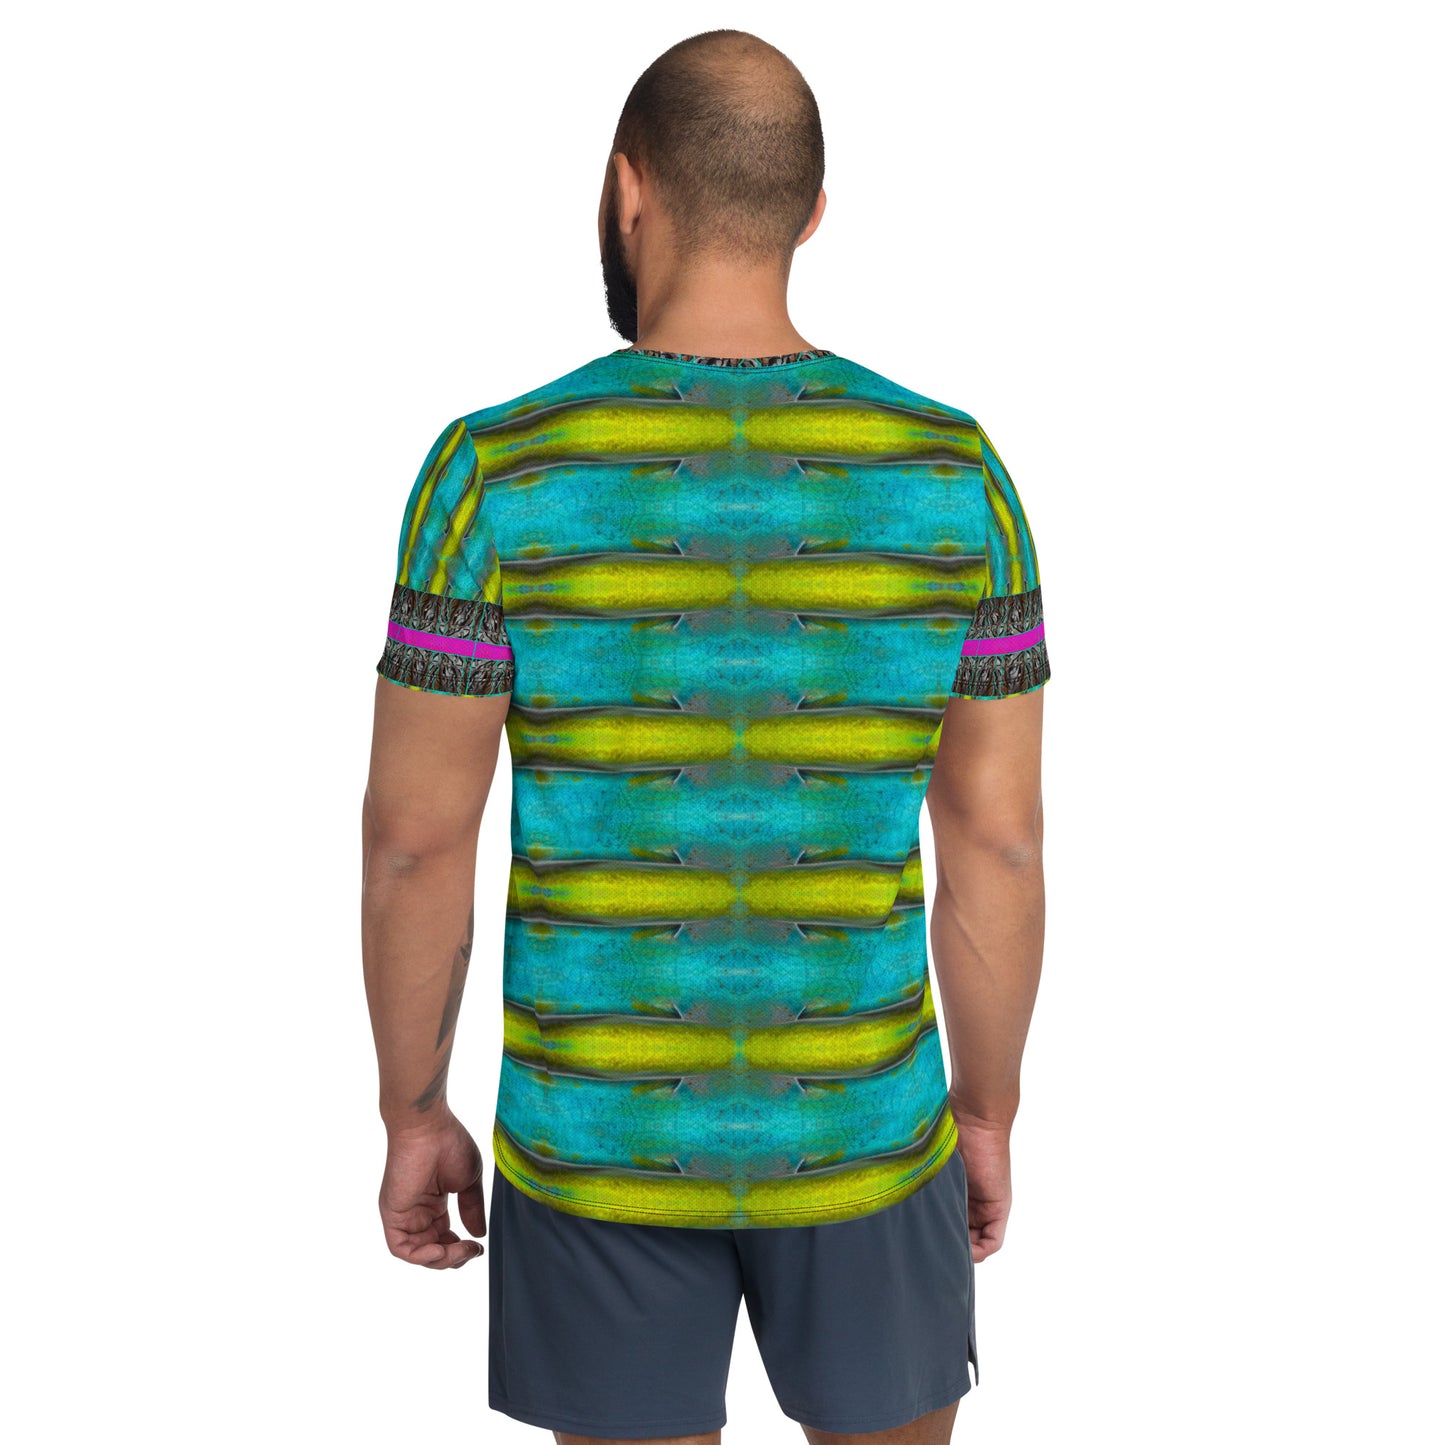 Athletic T-shirt (His/They)(Tree Link Stripe) RJSTH@Fabric#8 RJSTHS2021 RJS